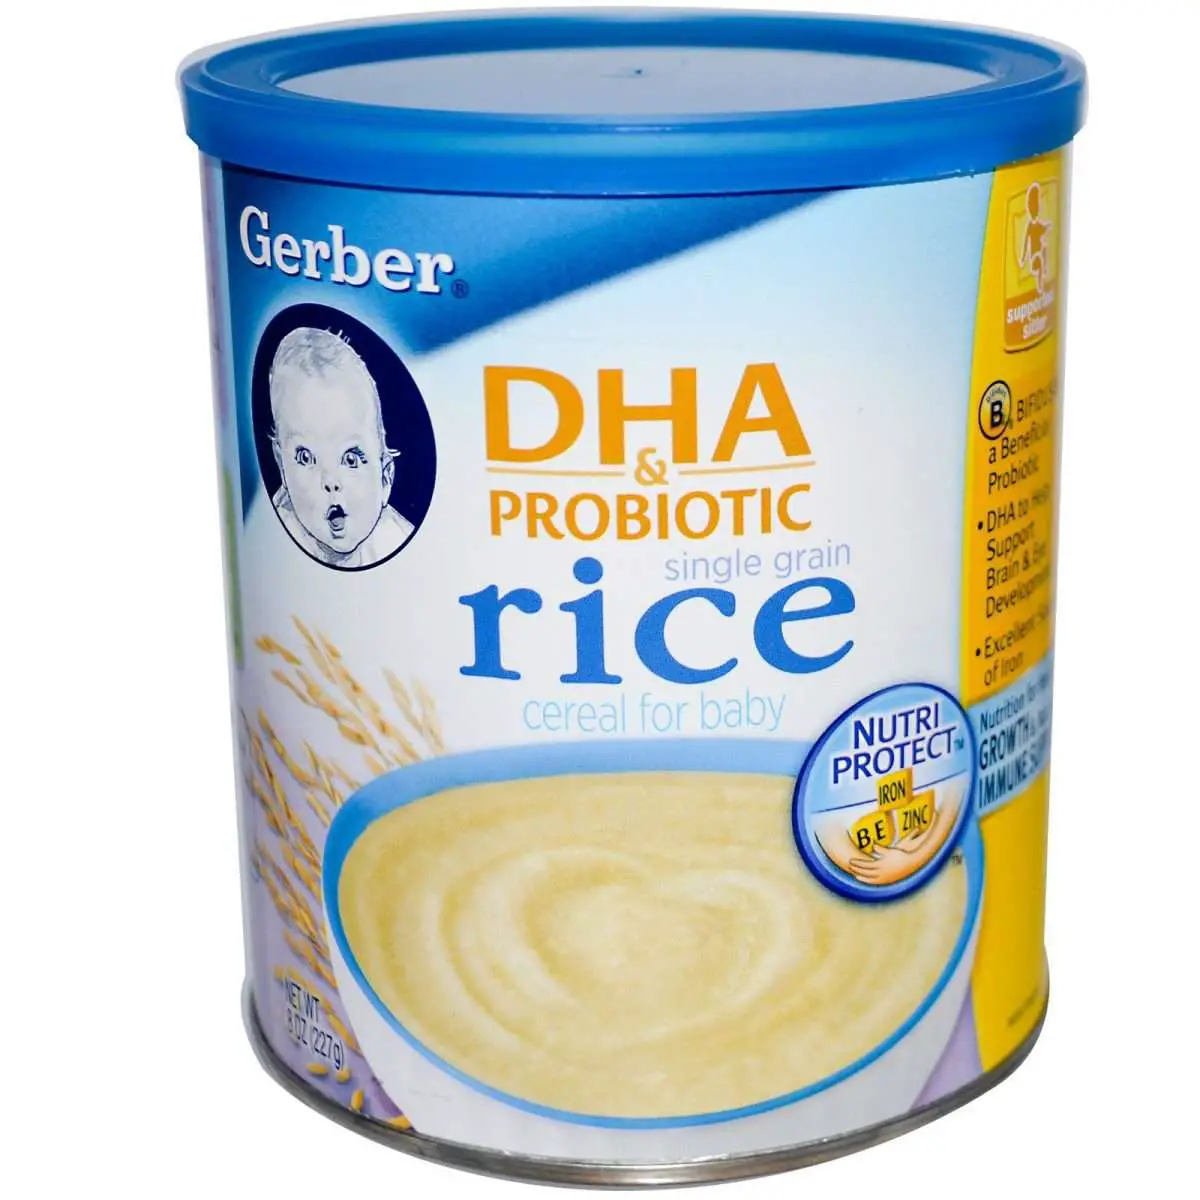 Gerber, DHA &  Probiotic, Single Grain Rice Cereal for Baby, 8 oz (227 g ...